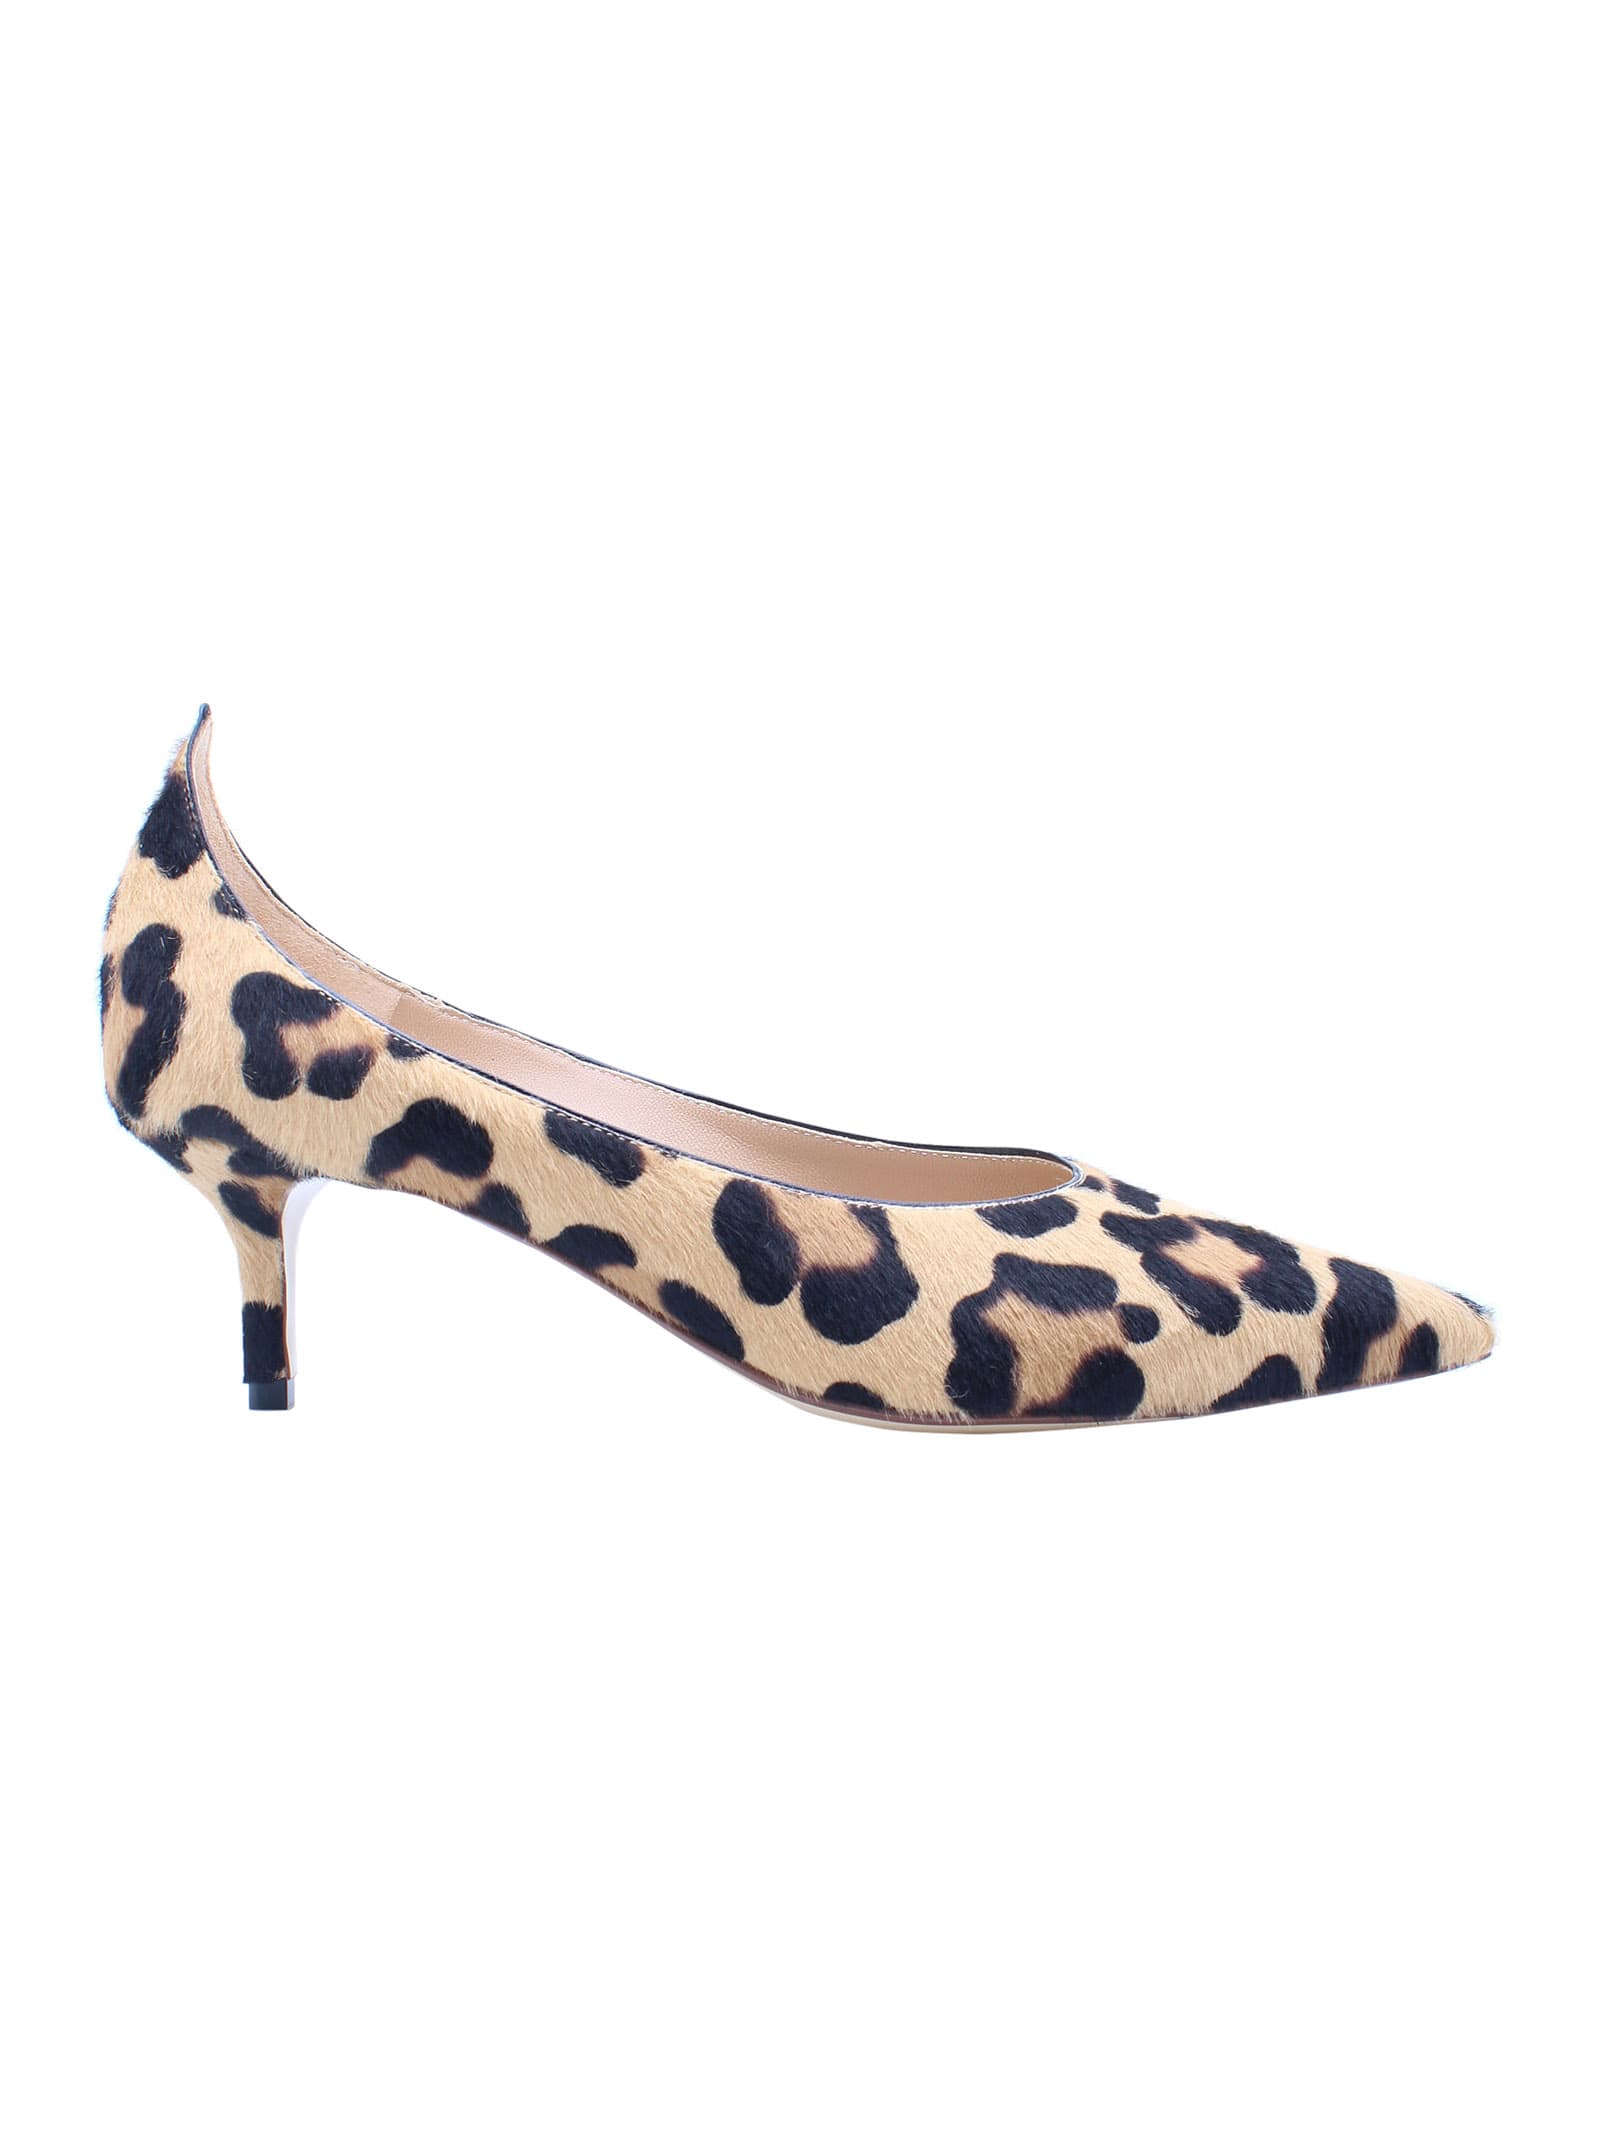 Buy Francesco Russo Leather Pumps online, shop Francesco Russo shoes with free shipping